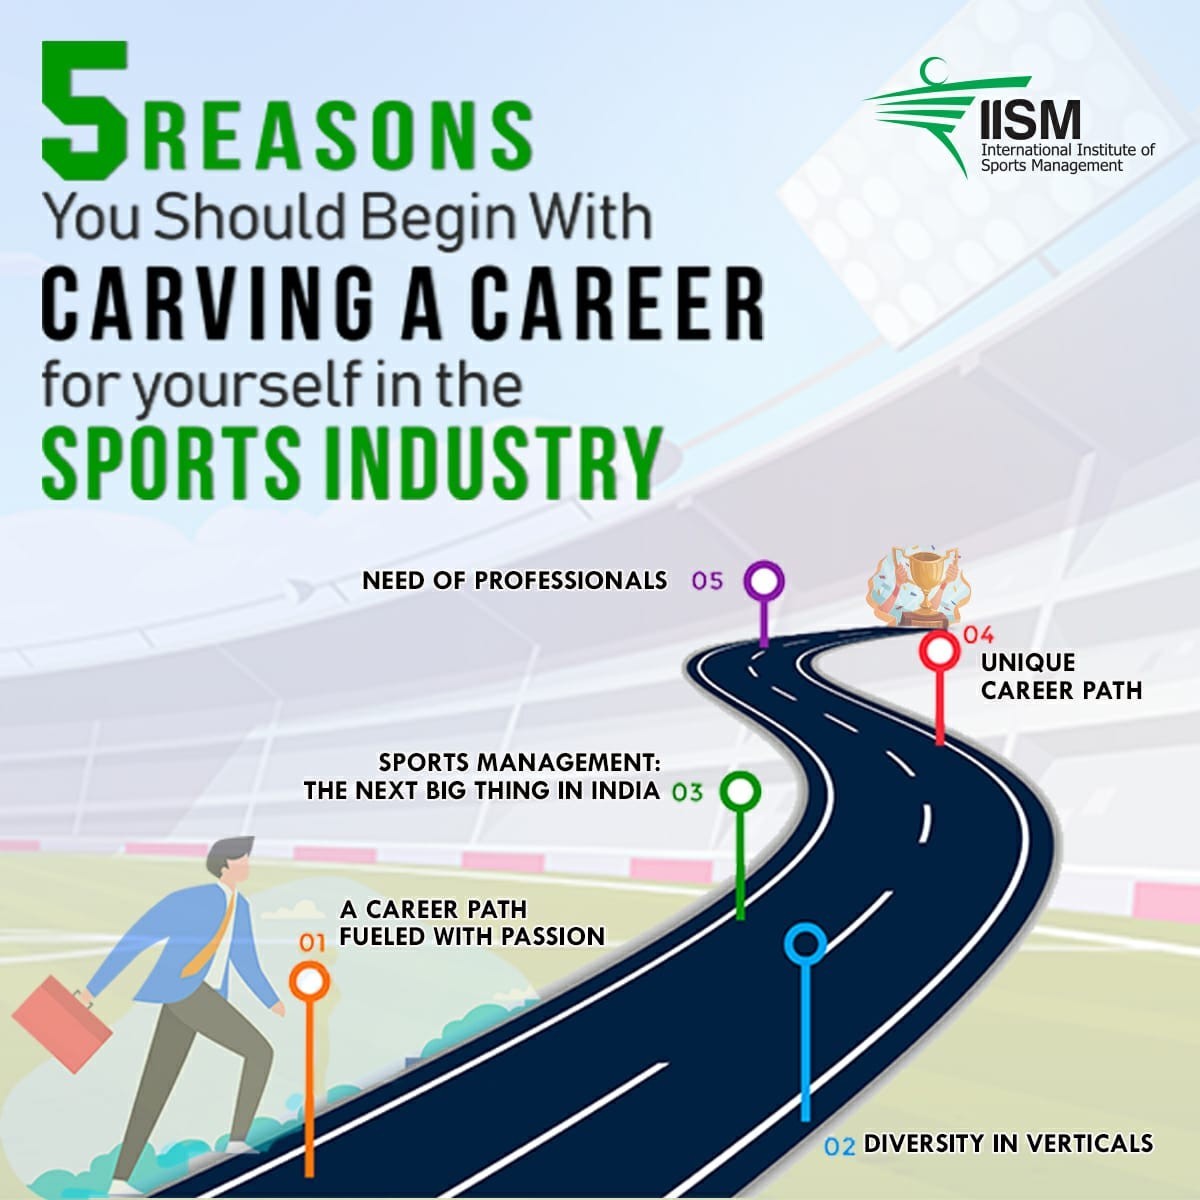 Five reasons you should begin with carving a career for yourself in the Sports Industry